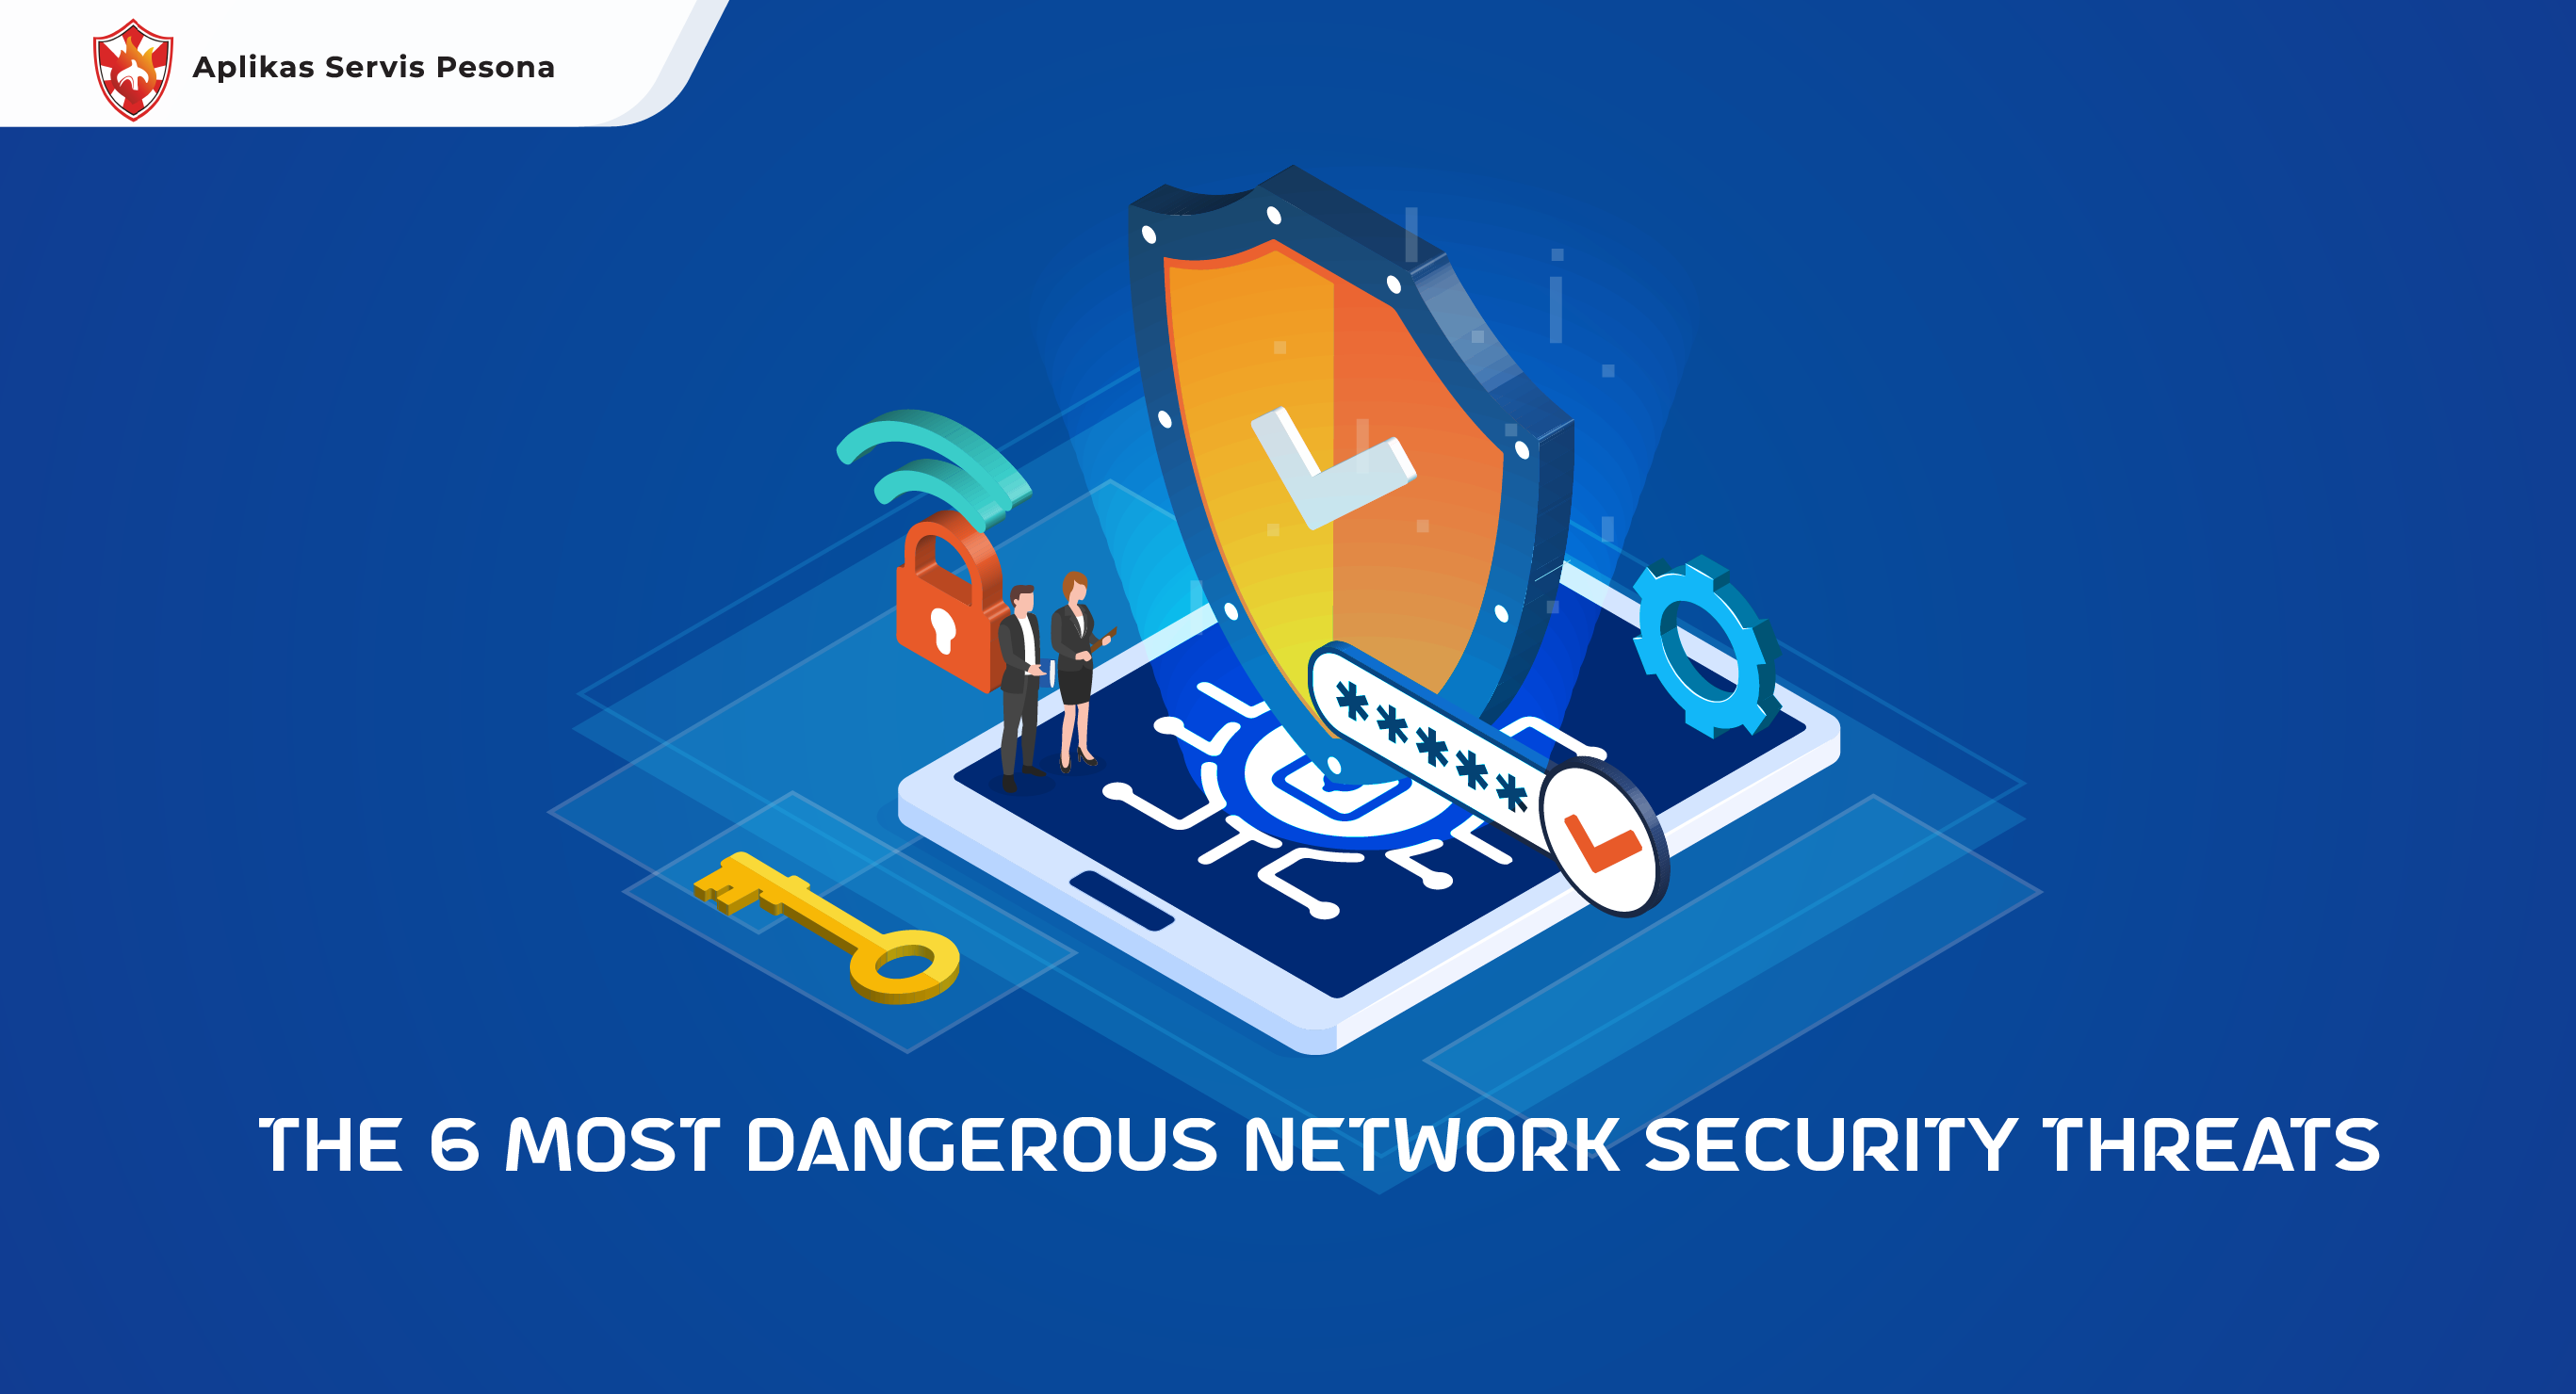 Types of Network Security Threats to Be Aware Of